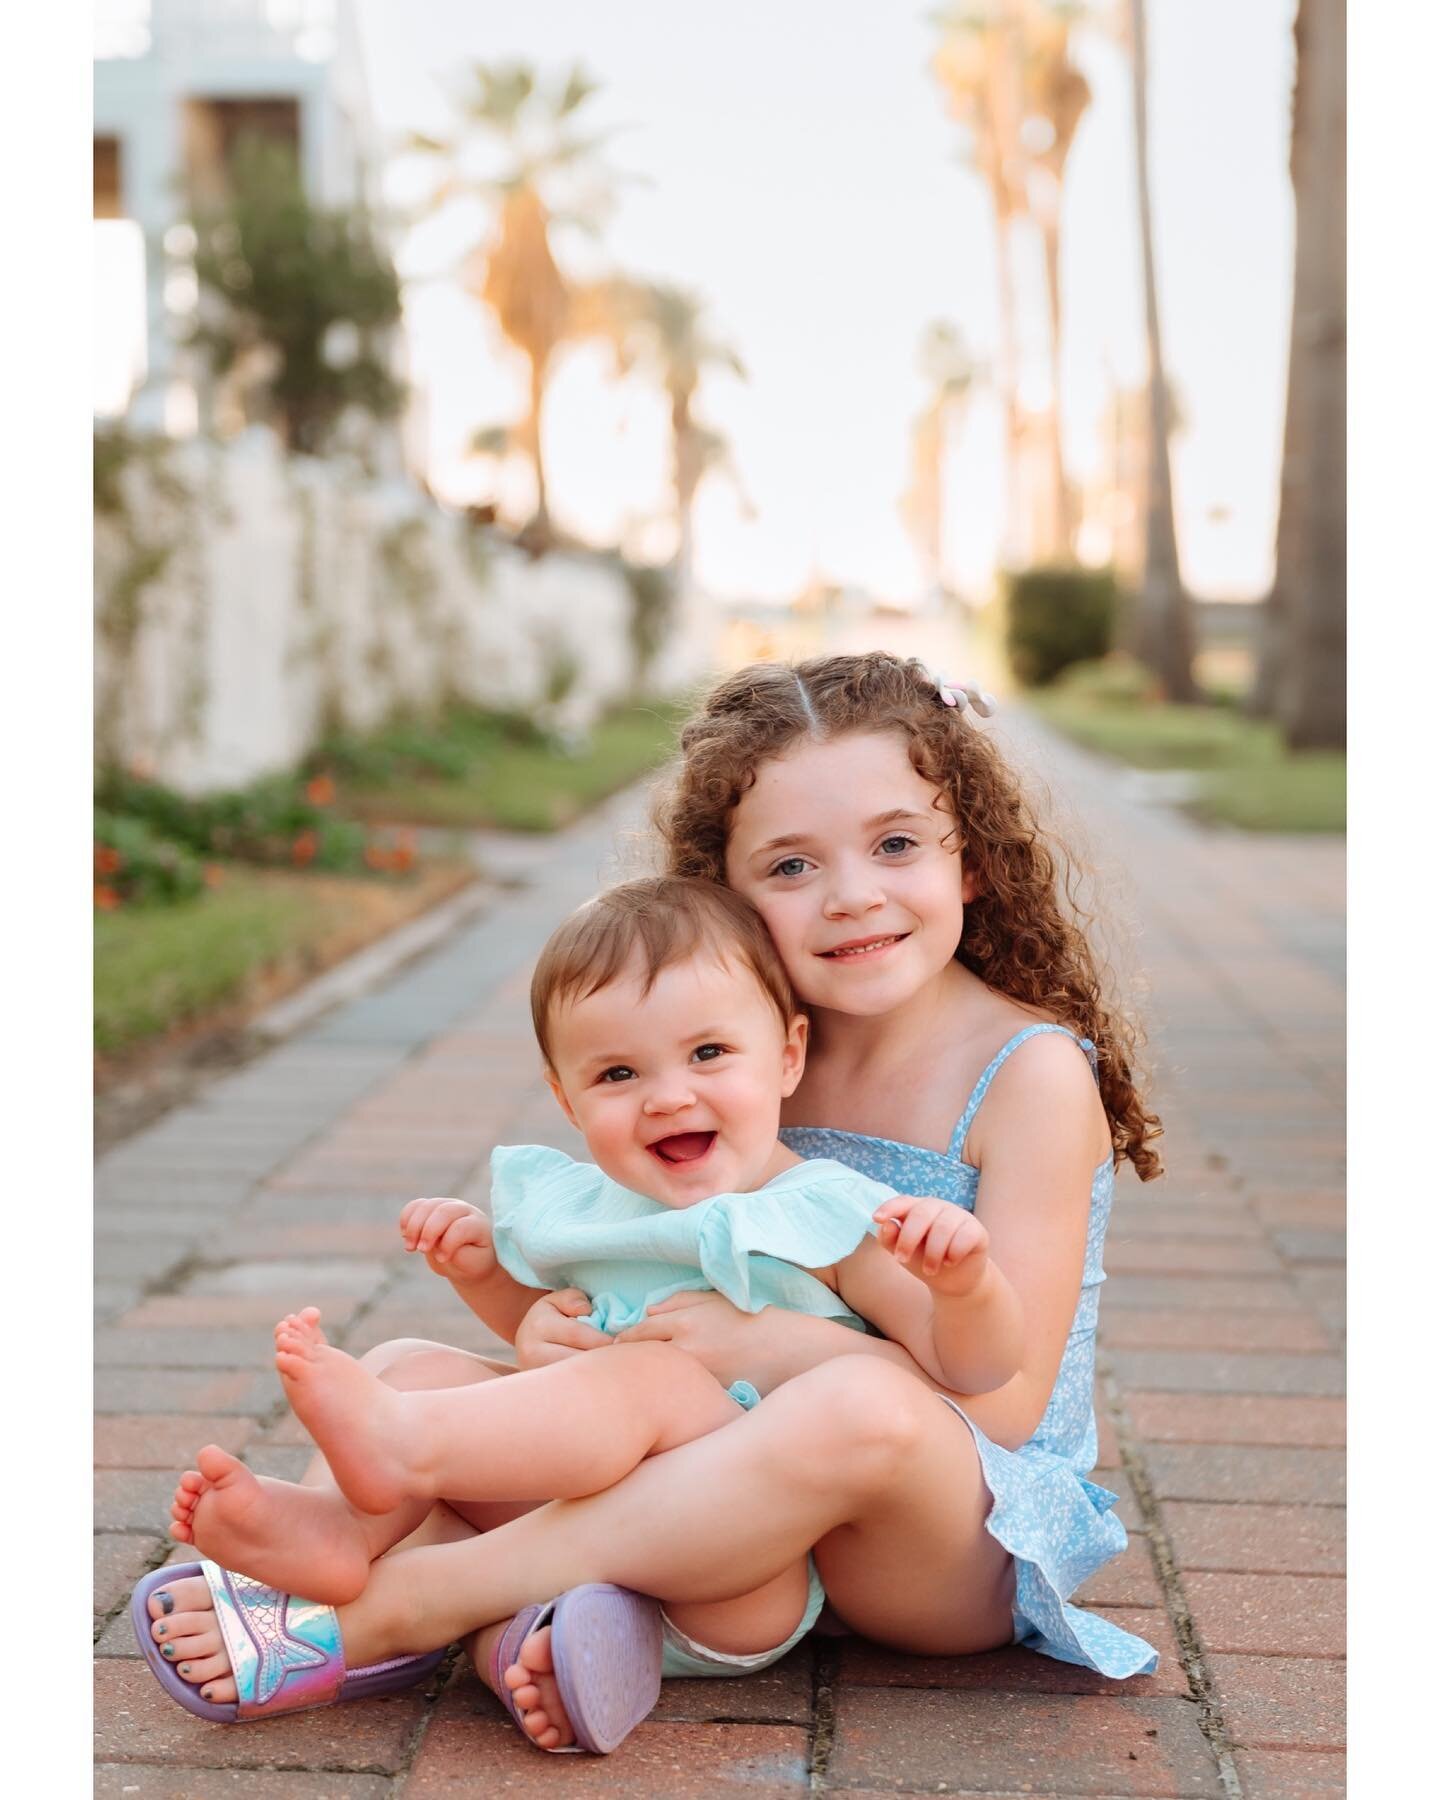 Posting here and there to say hello. 🌺 Wow all these new options for making a post. Am I even doing it right anymore? 

#familyphotography #family #familyphotographer #glveston #familylove #galvestonphotographer #galvestonbeach #familytime #portrait